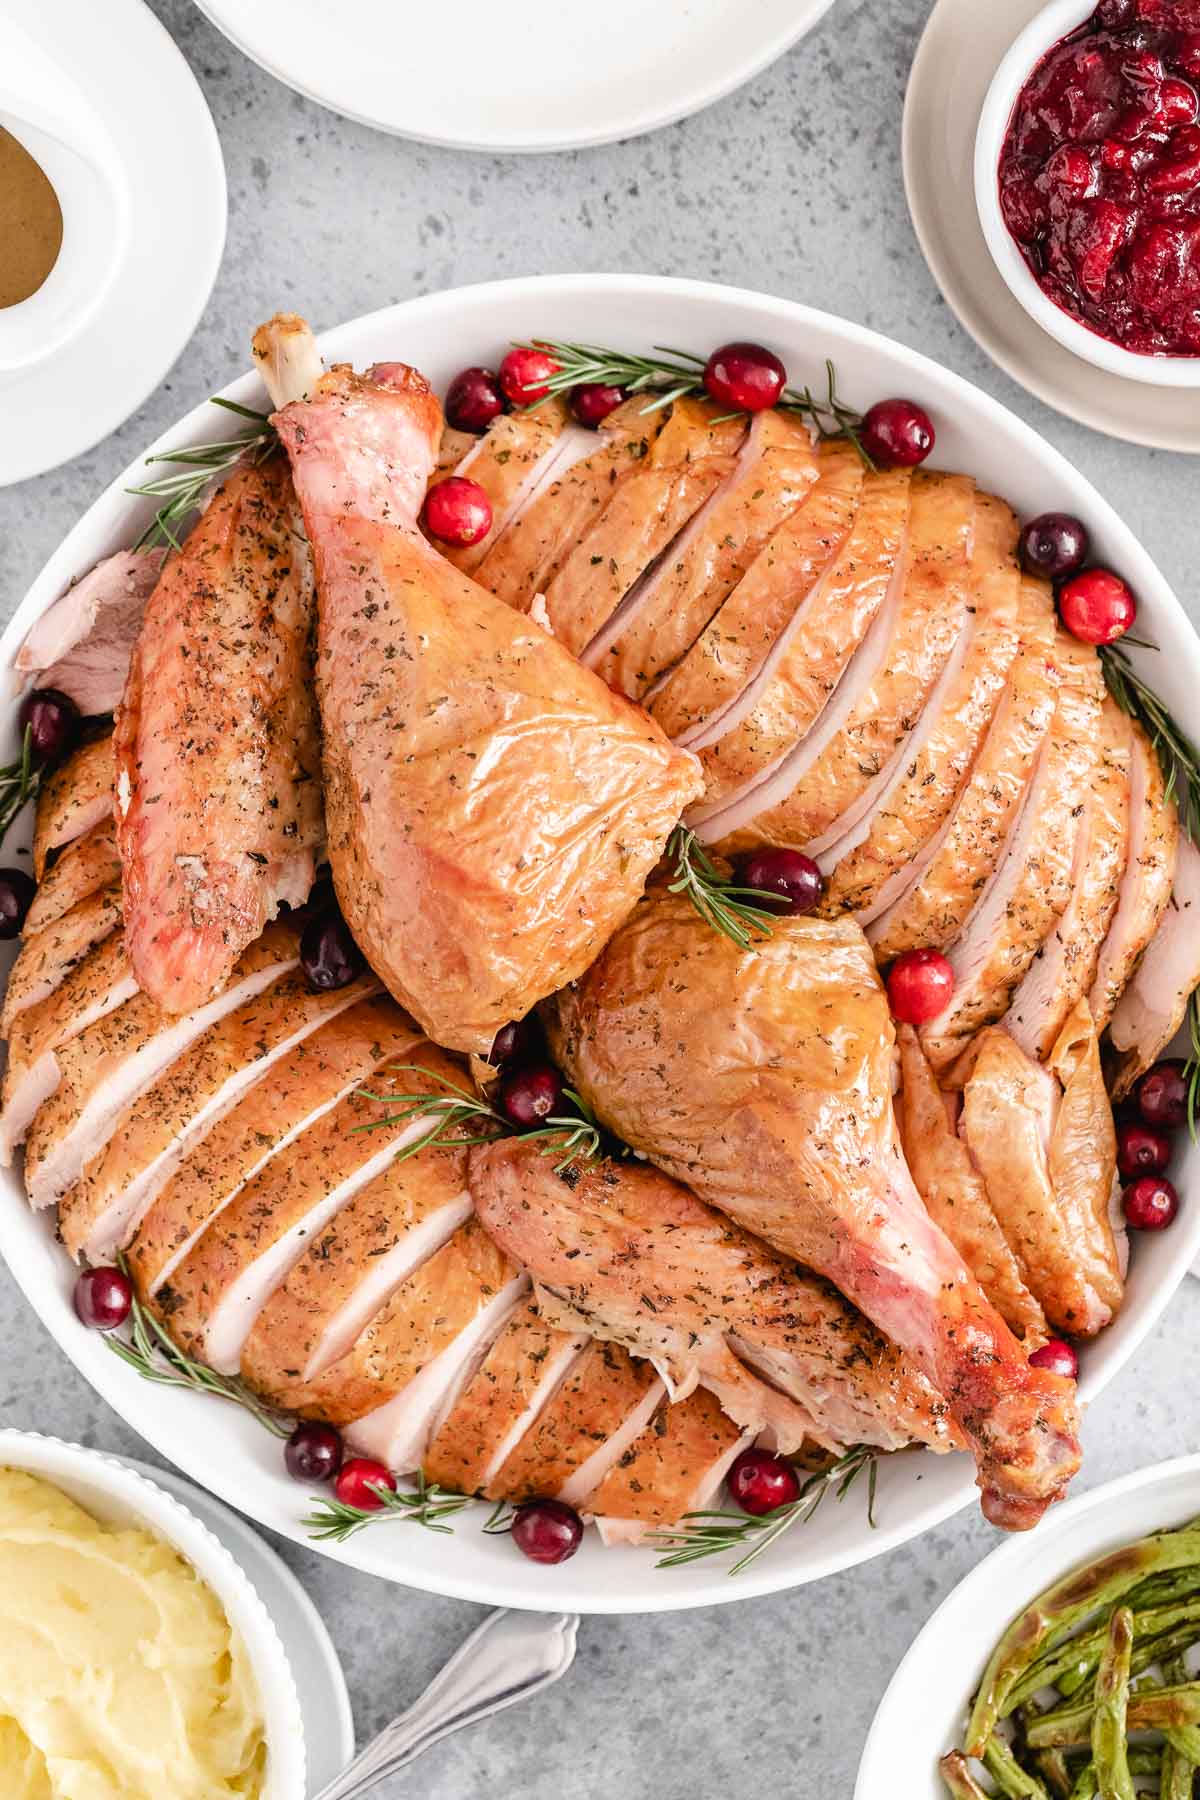 A sliced whole turkey on a white serving platter garnished with cranberries and rosemary.